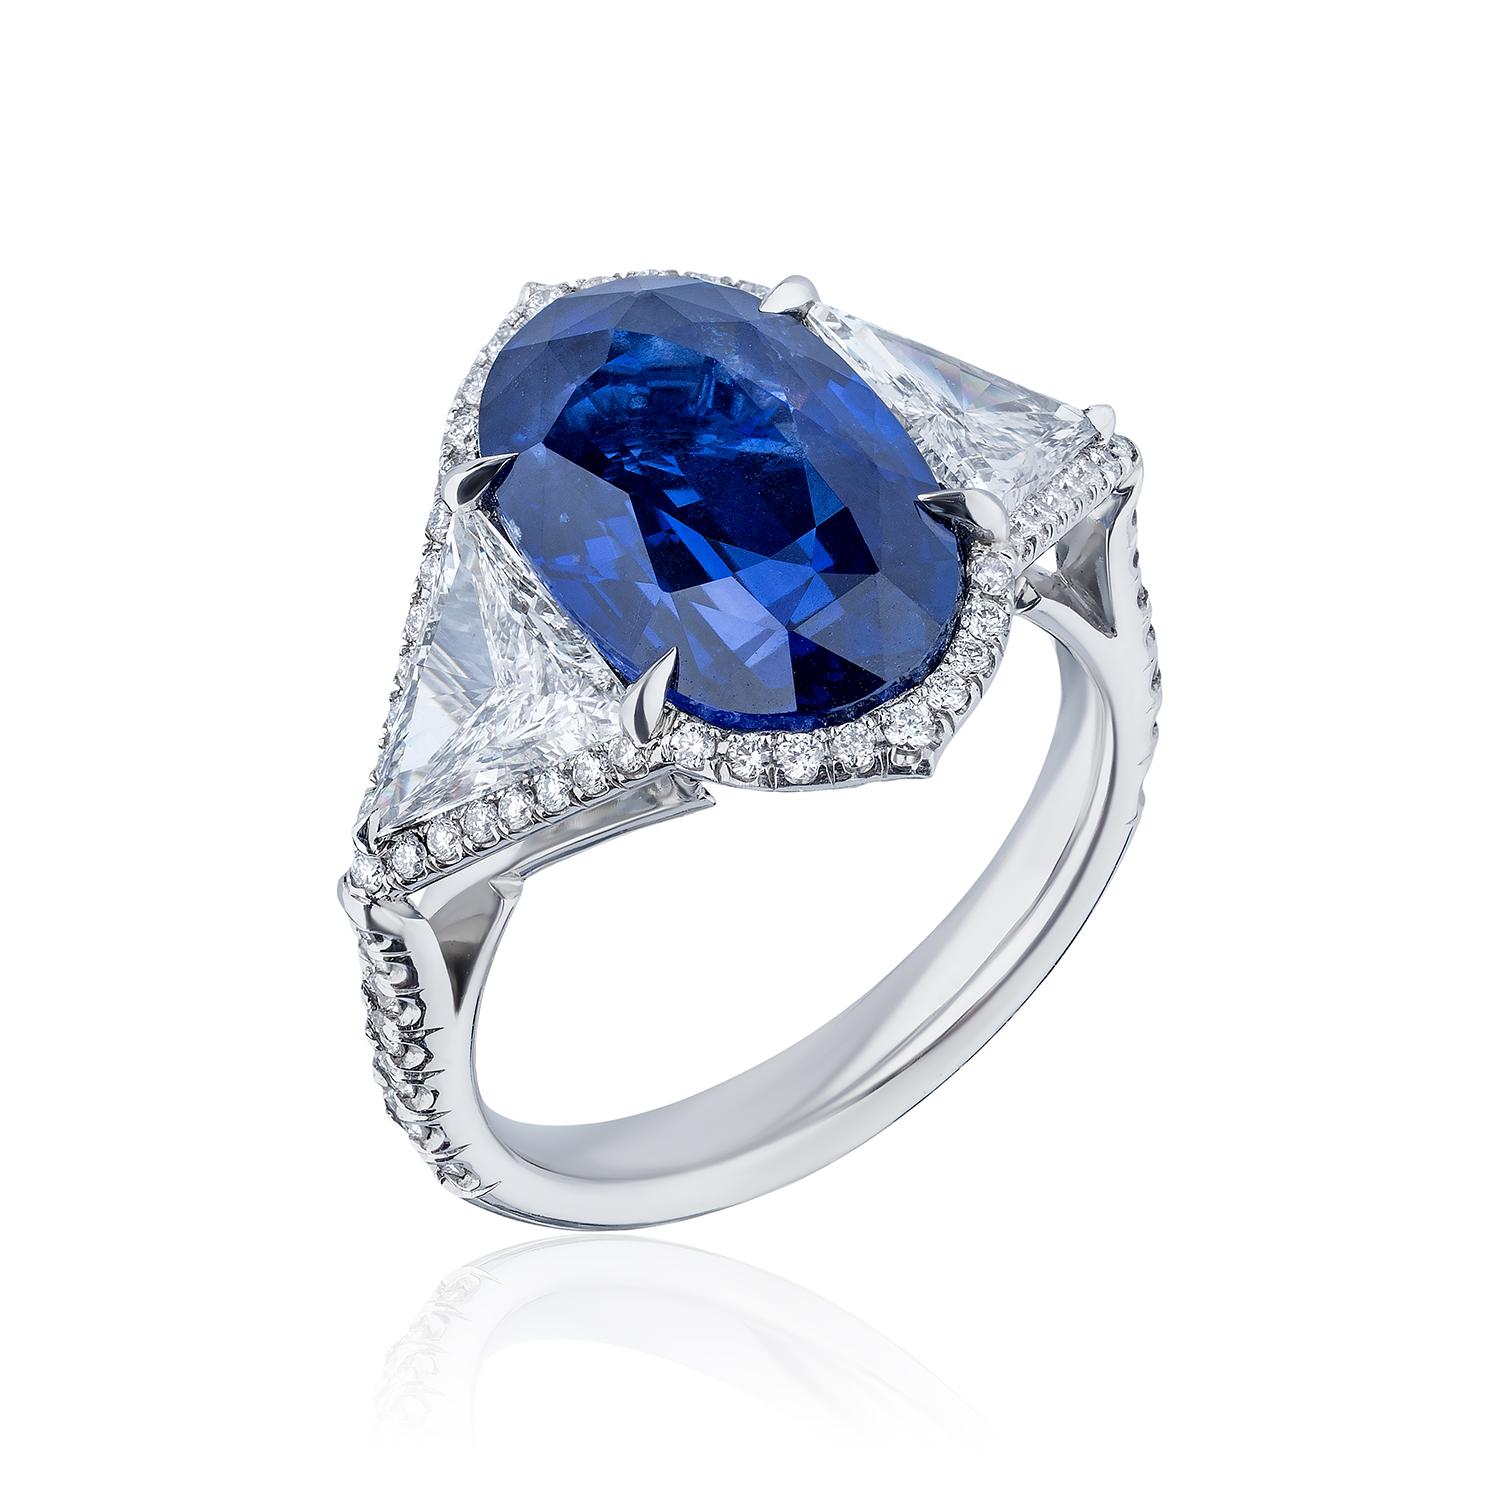 Centered upon a Oval Shaped Sapphire weighing 8.25 Carats and flanked by Triangle Diamonds, weighing 1.13 Carats of F color and VS Clarity. Further surrounded by 62 Round Brilliant Diamonds weighing 0.70 Carats.

Sapphire is certified by GIA as